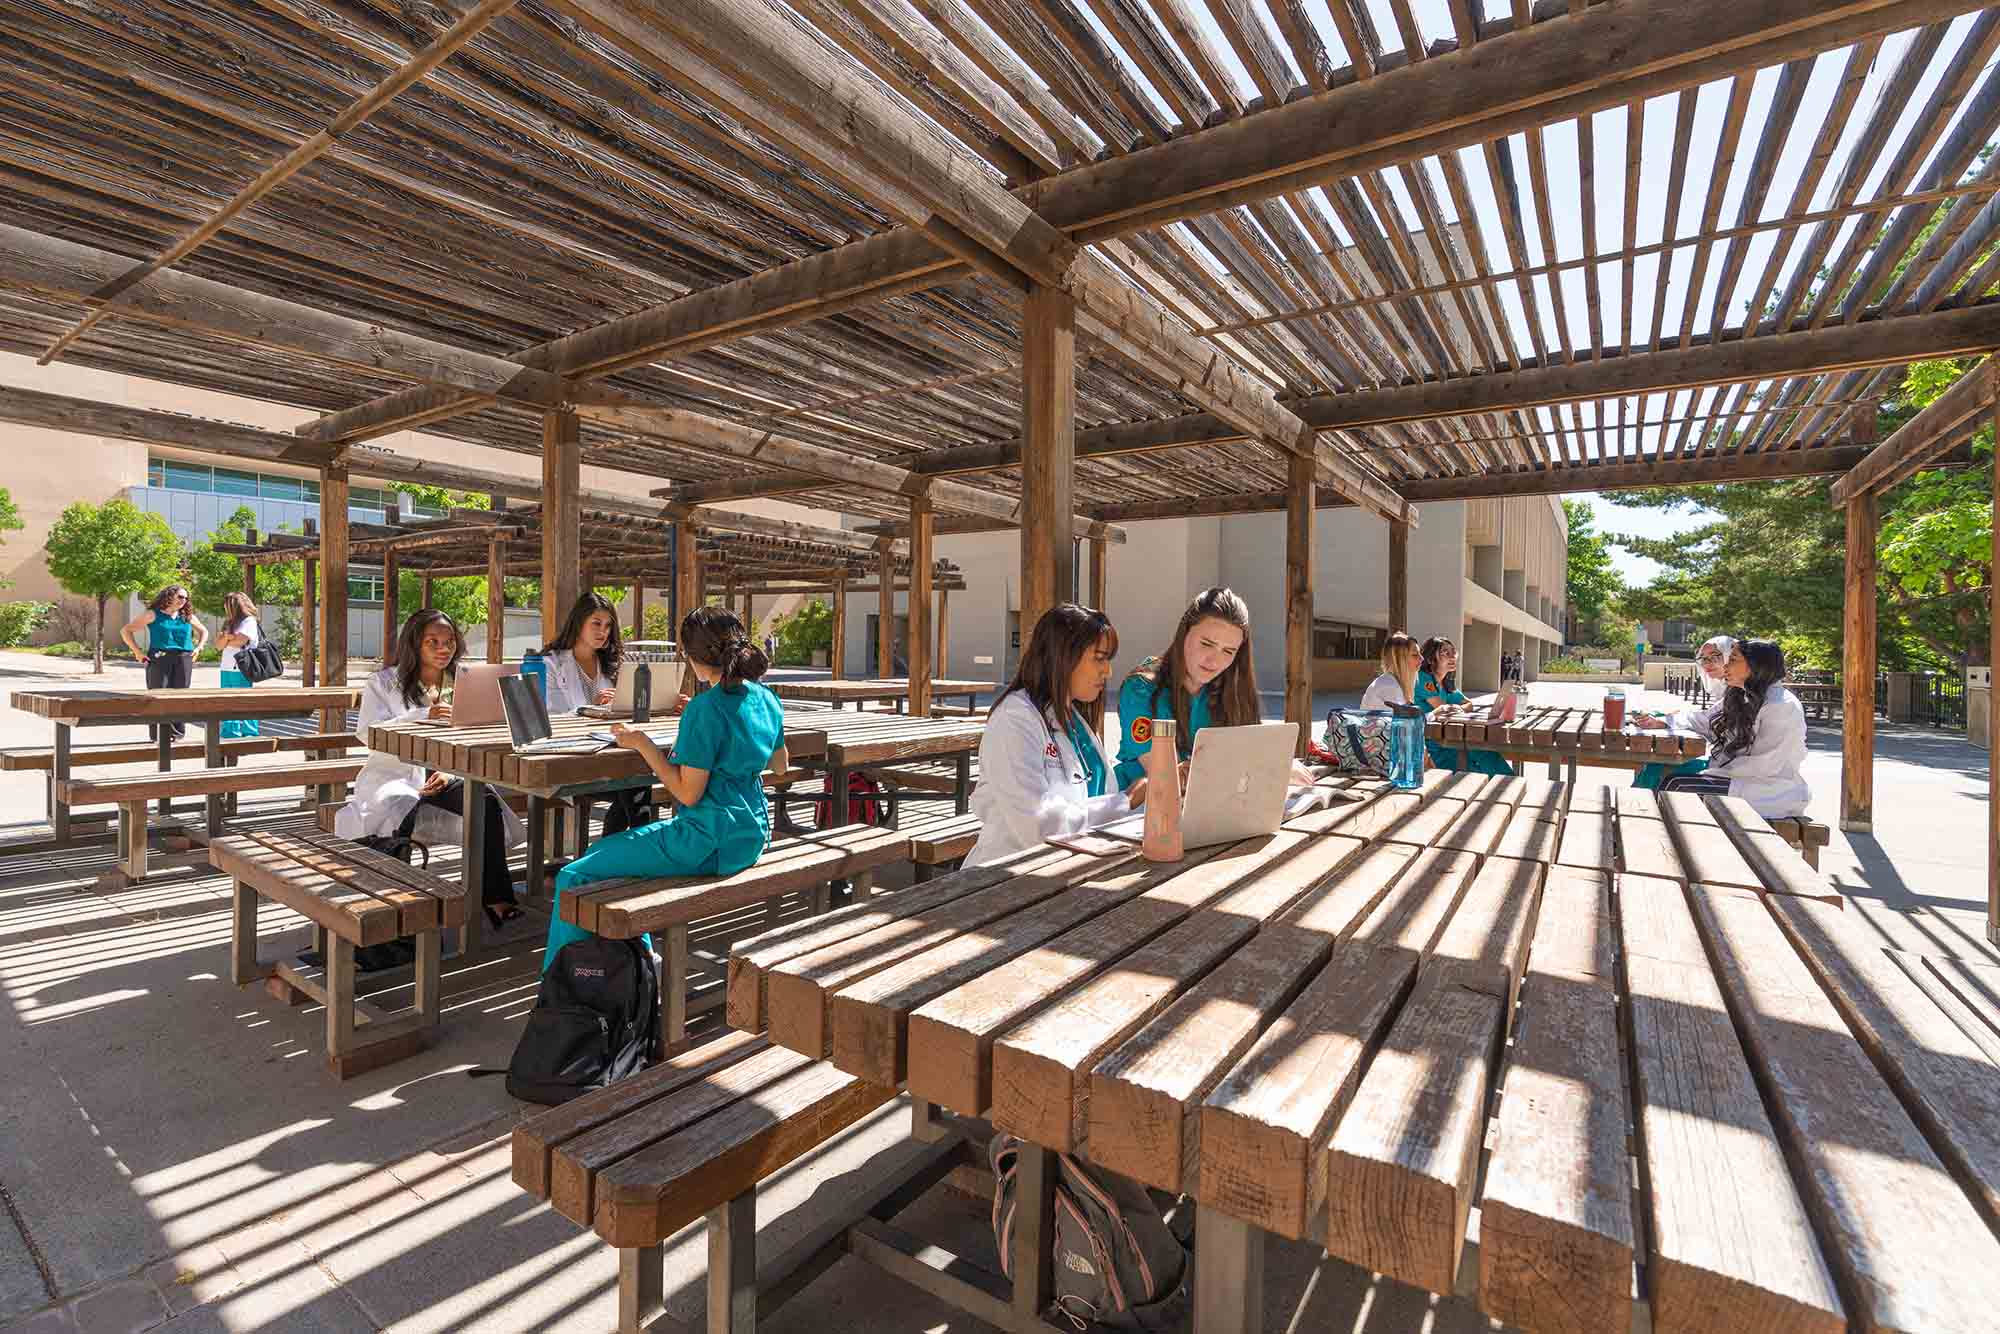 Students studying at tables under pergolas.